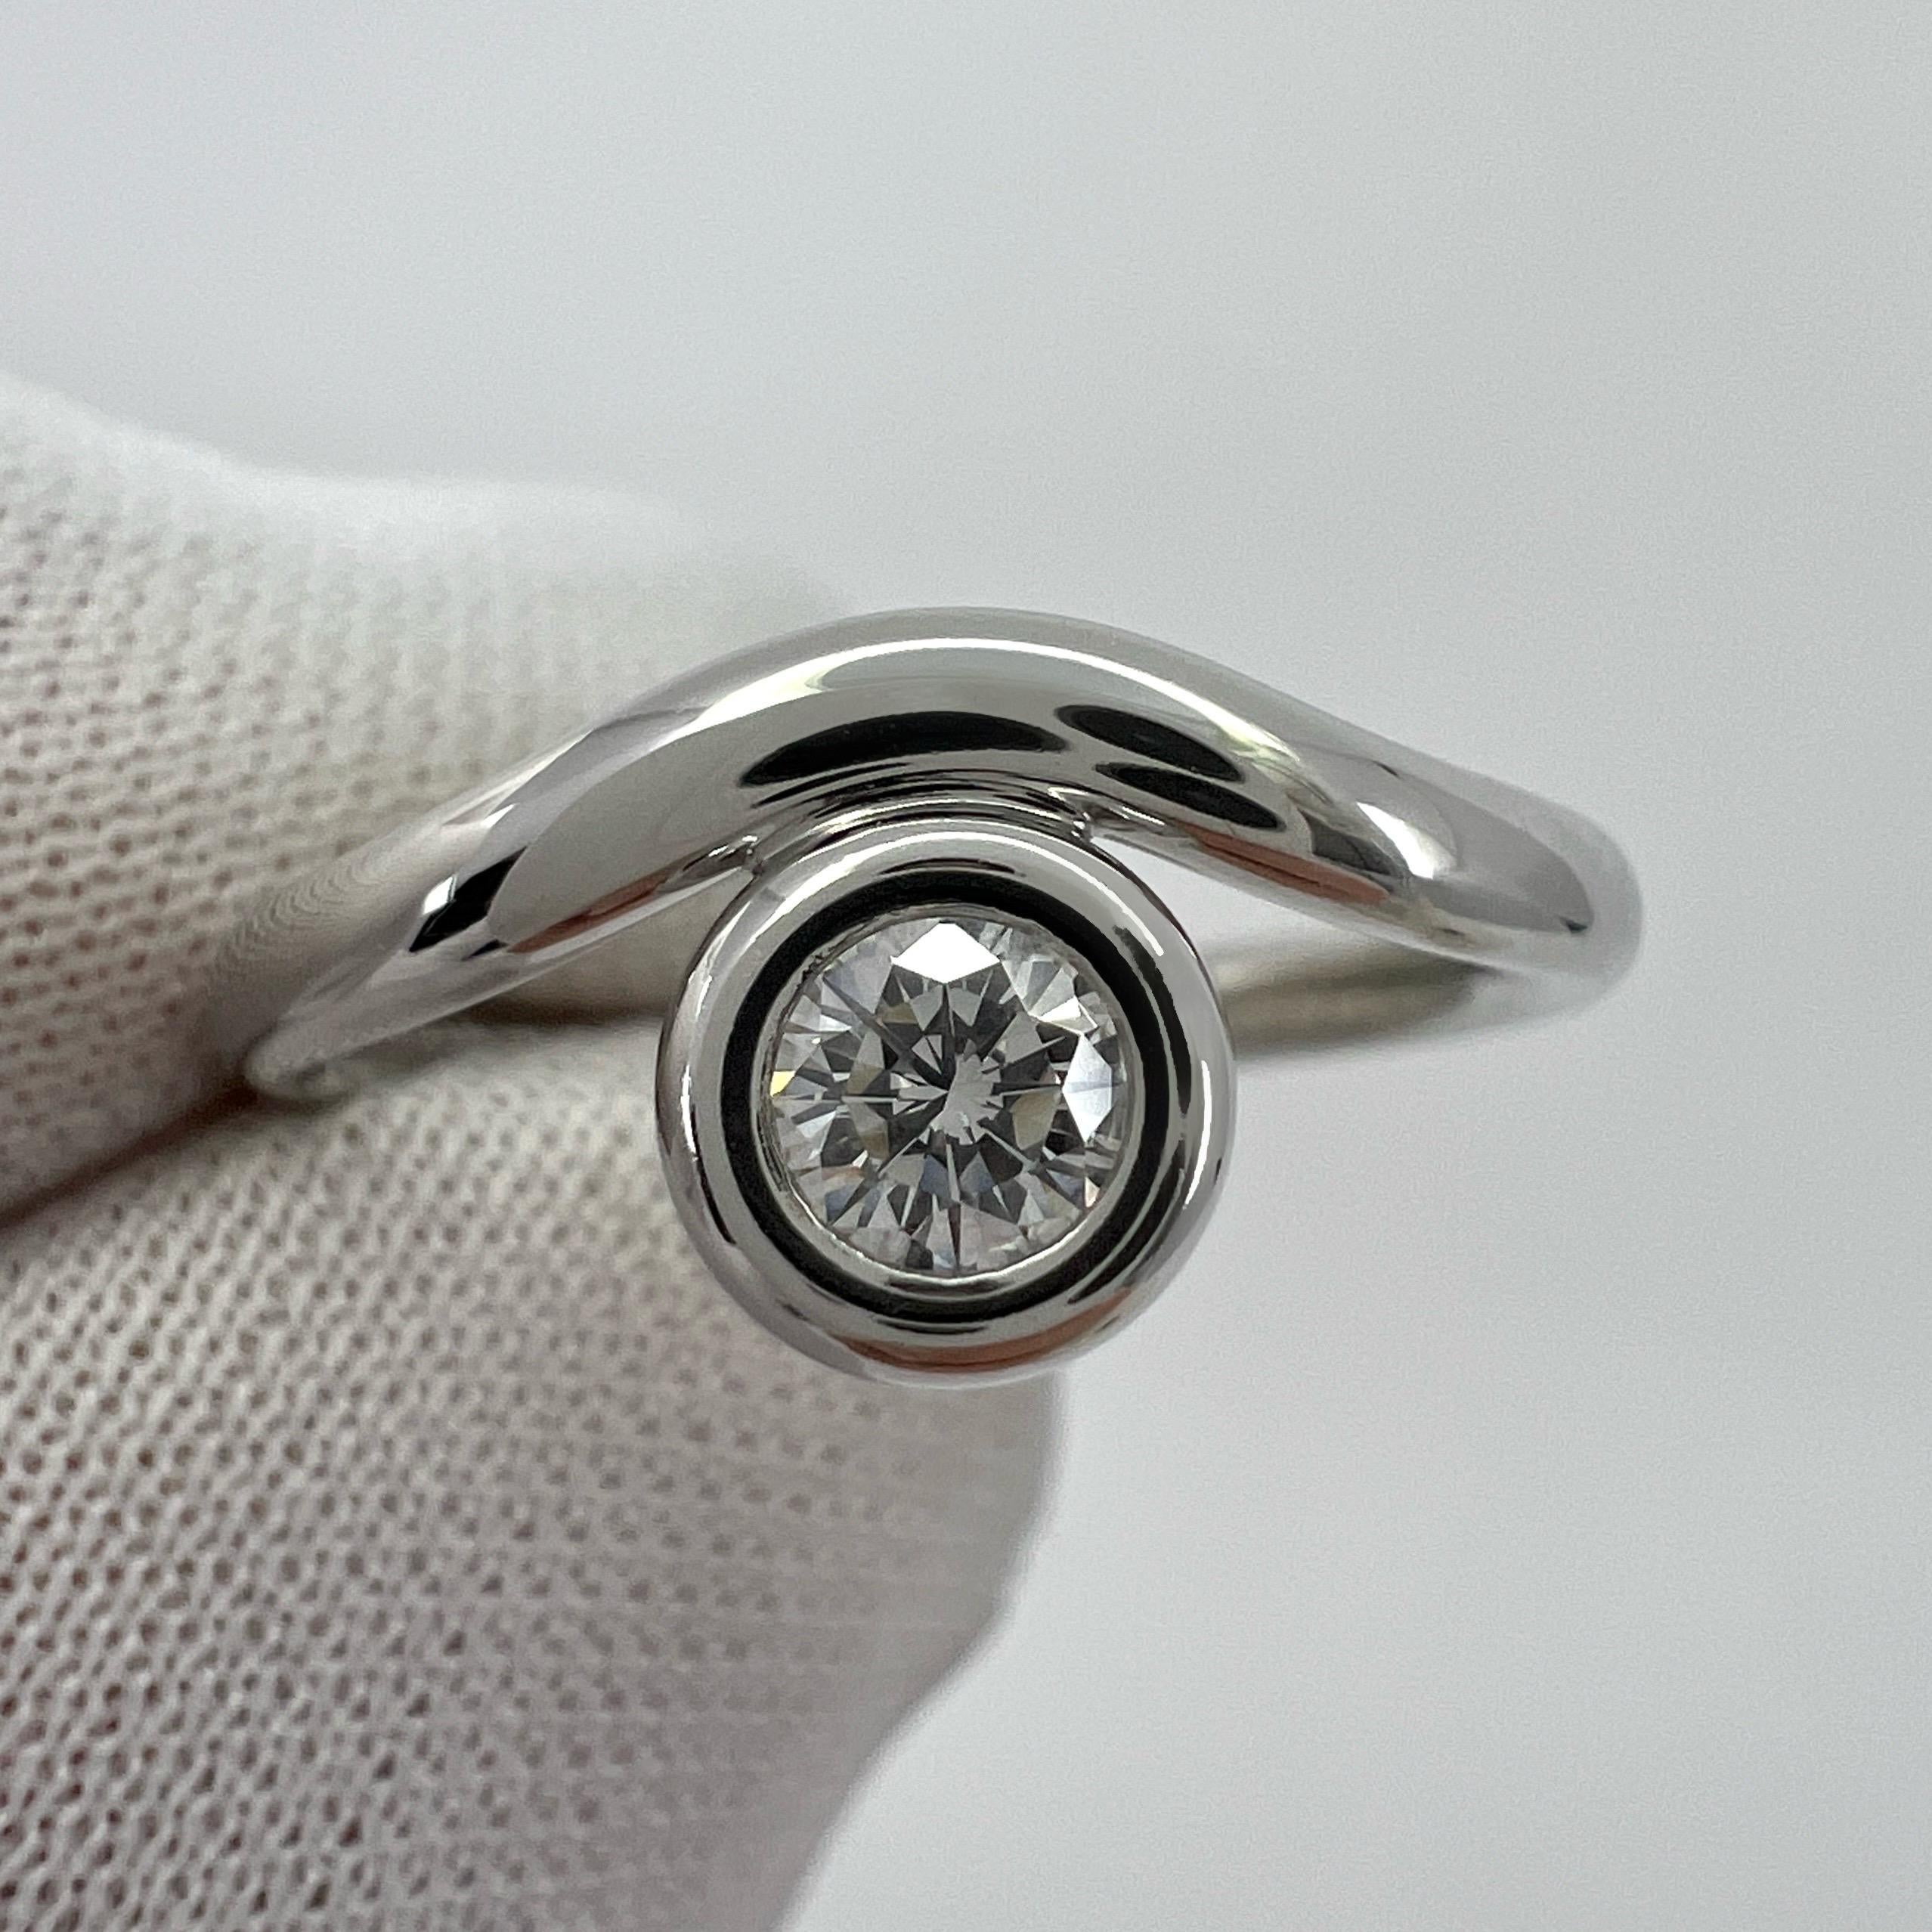 Vintage Tiffany & Co. Round Cut Diamond By The Yard 950 Platinum Solitaire Ring For Sale 4